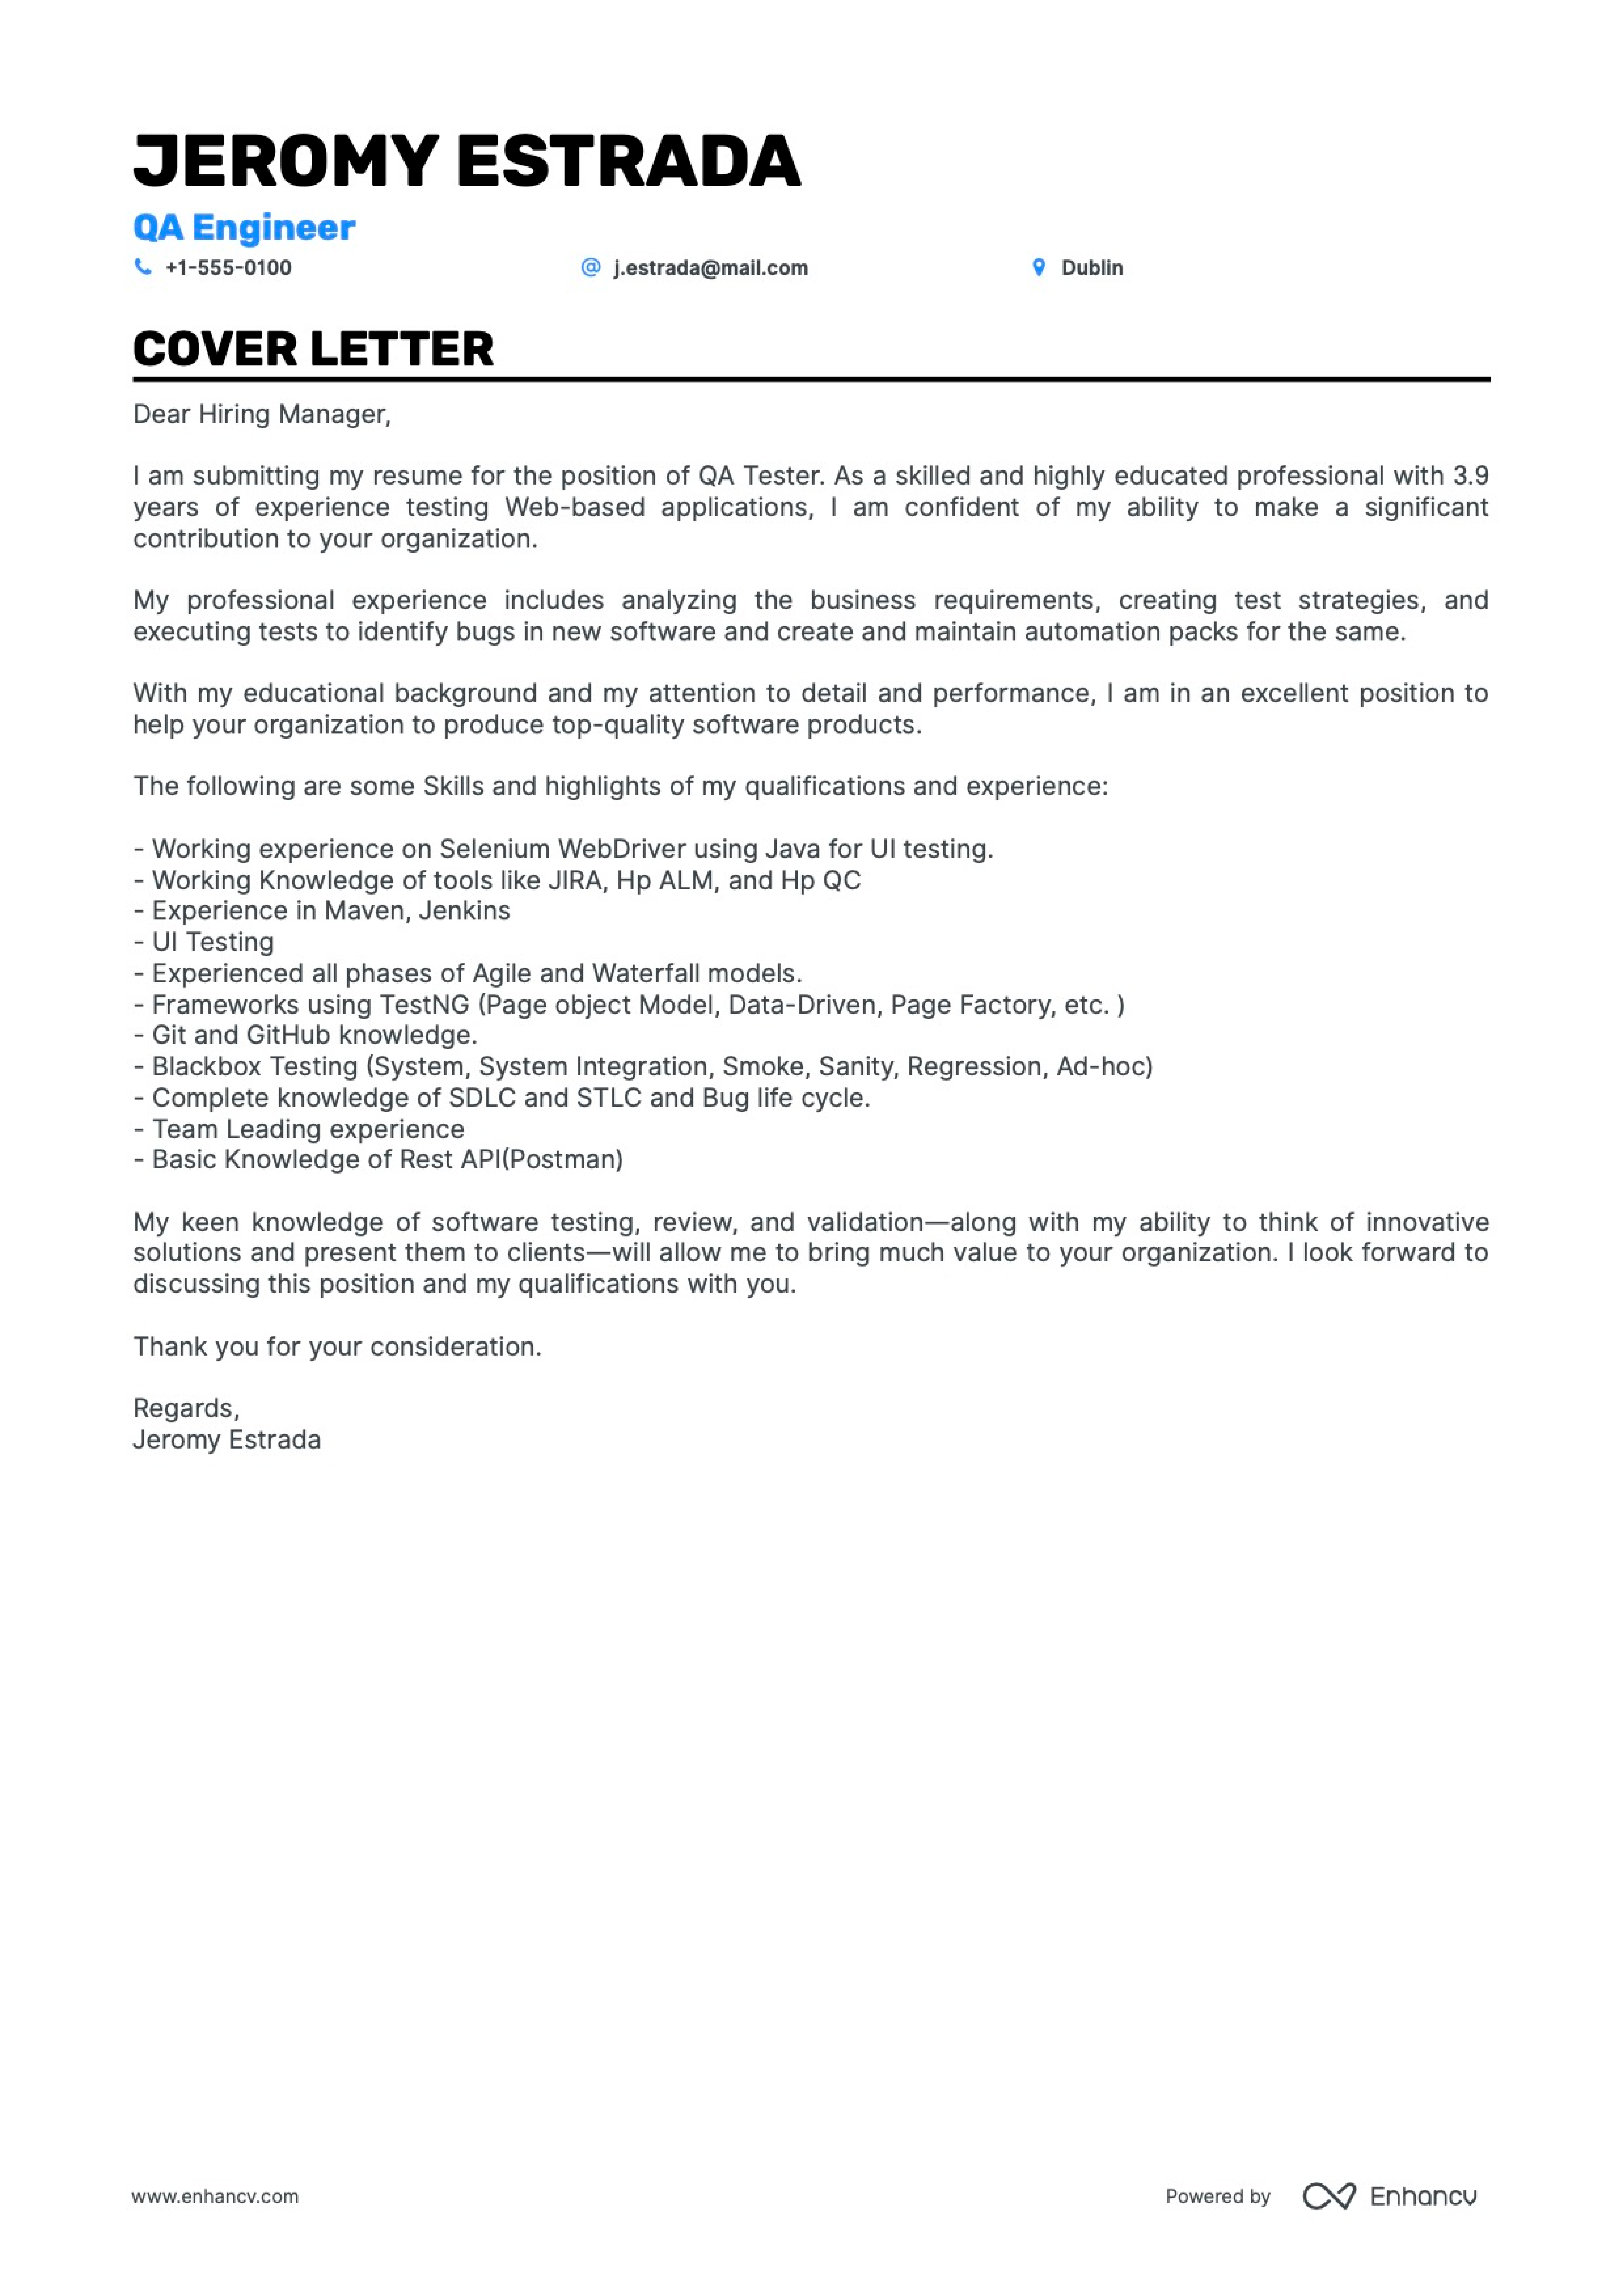 human resources cover letter examples